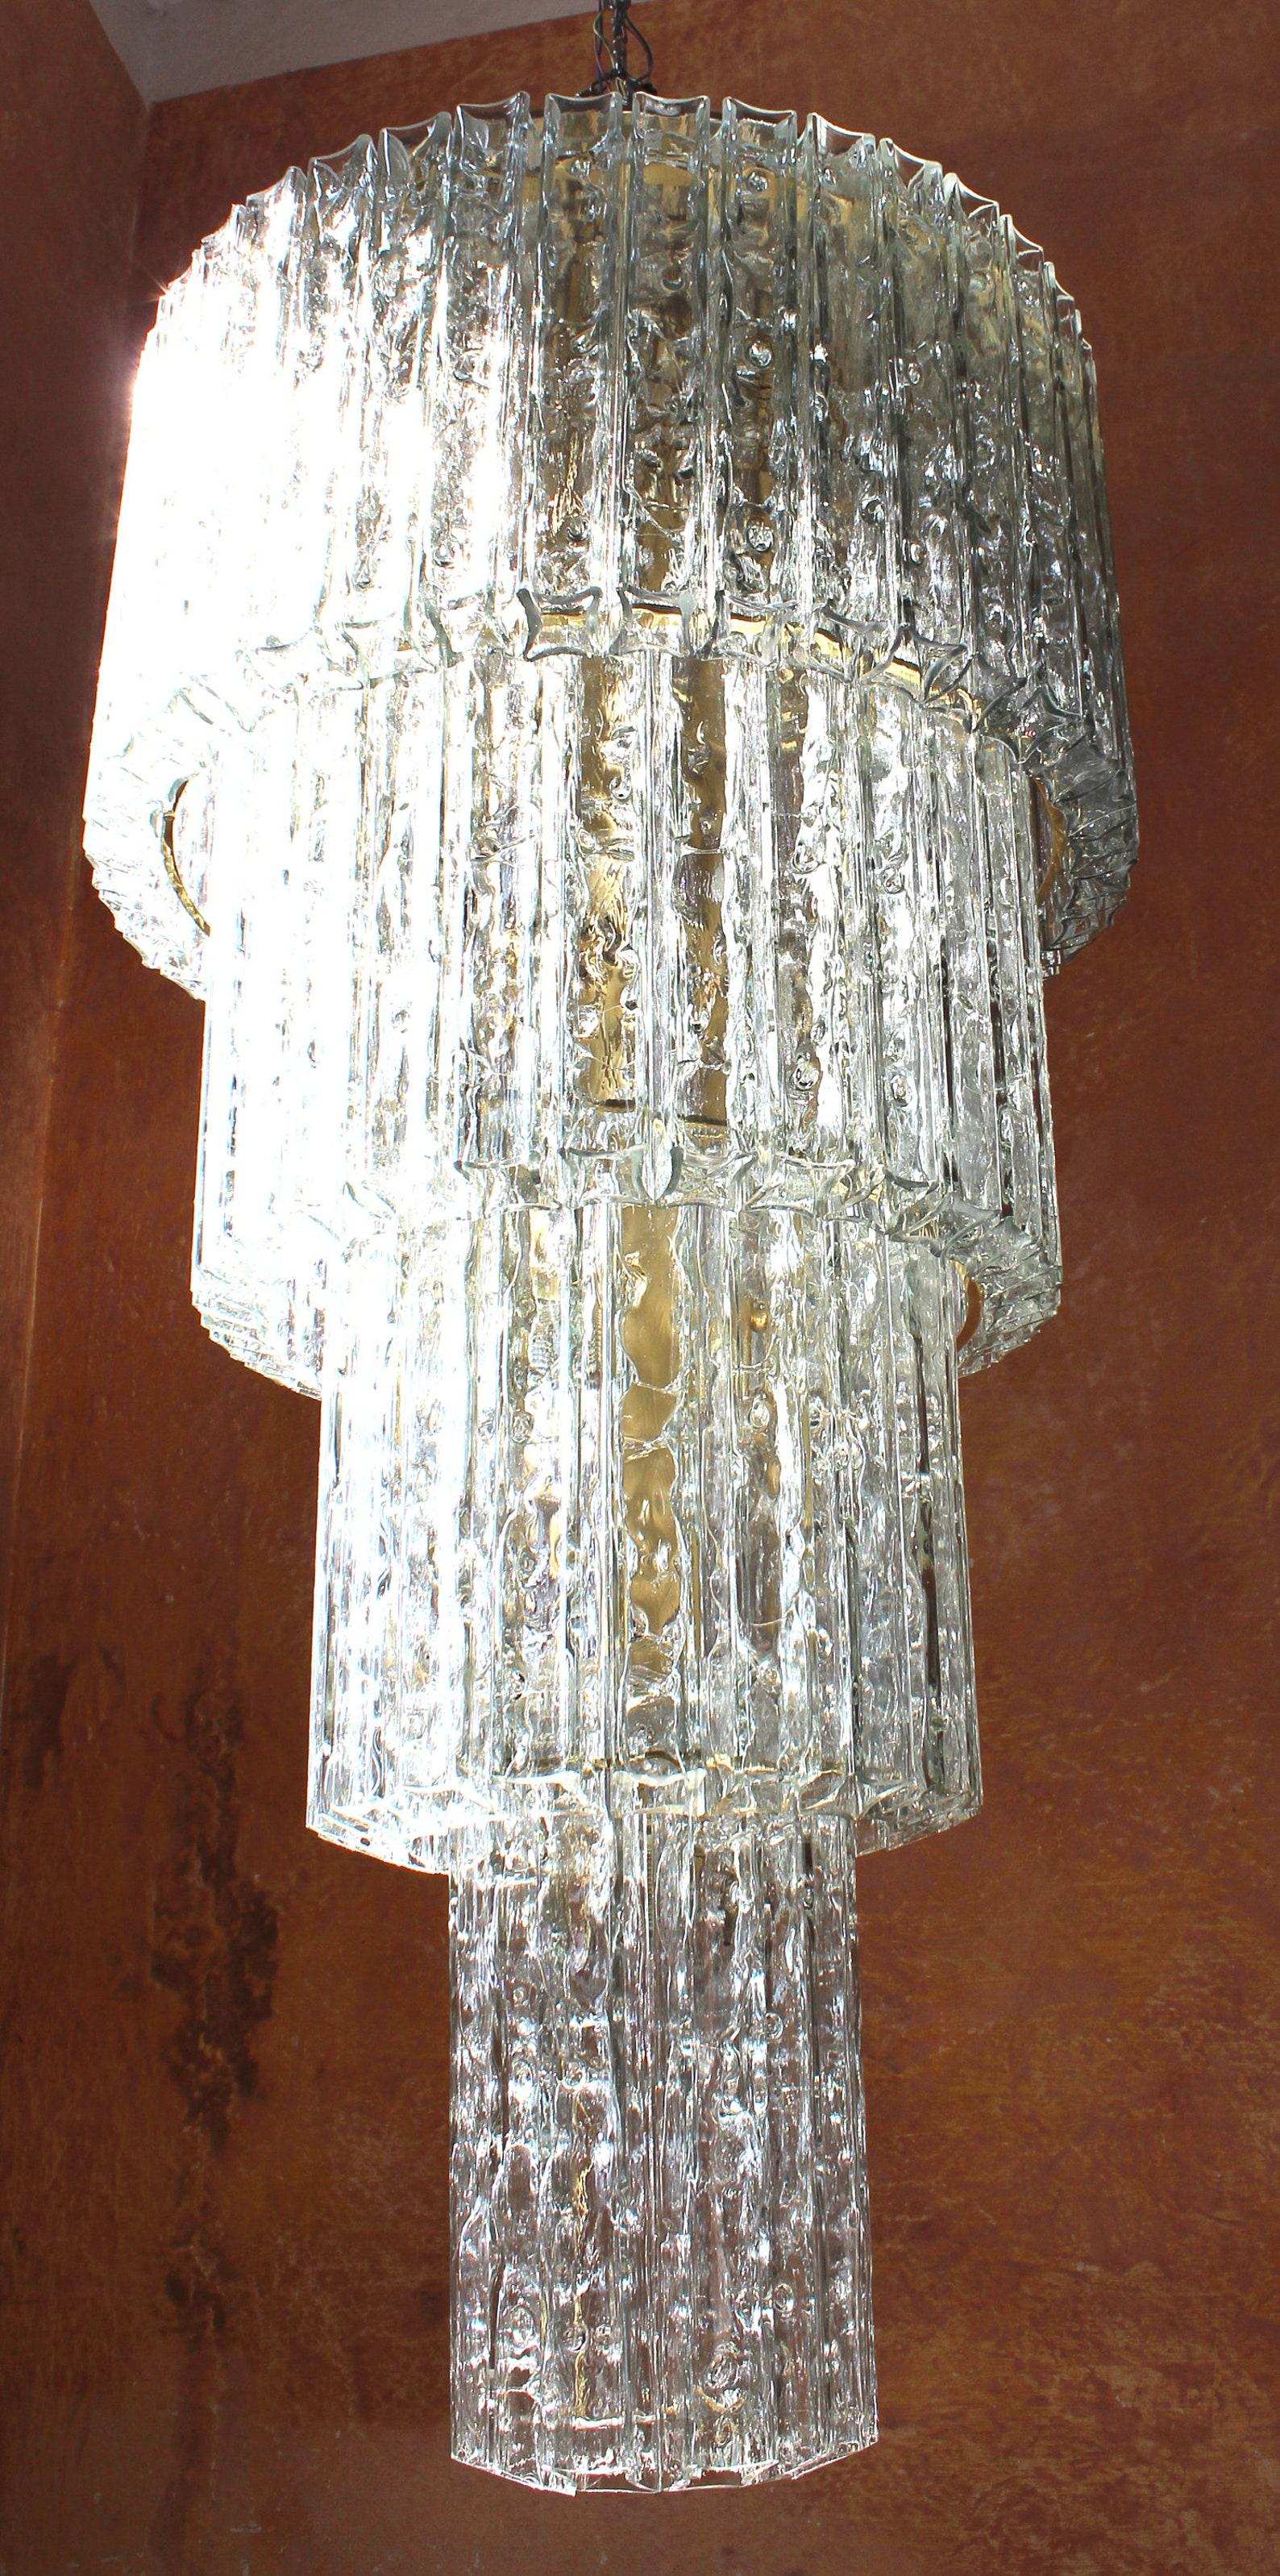 1 of 2 Gigantic 170lbs Doria Ballroom Plafoniere Chandelier, Germany 1970s In Good Condition For Sale In Berlin, BE